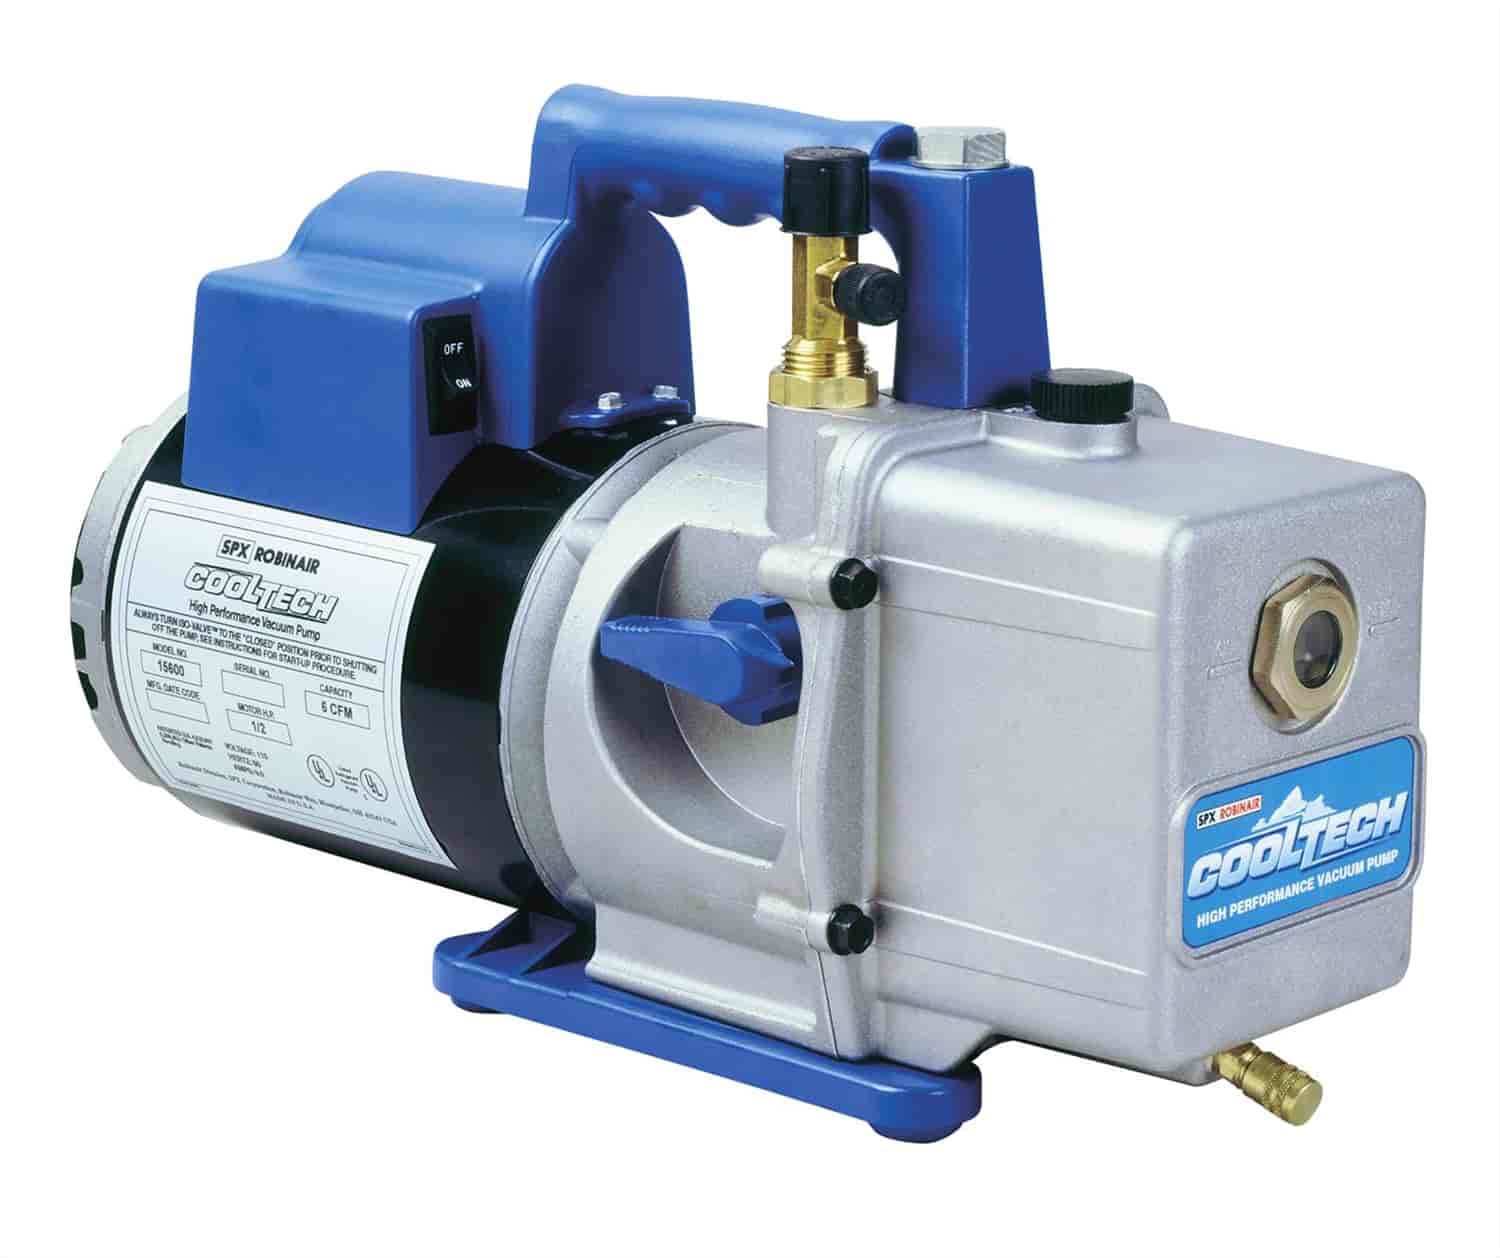 Vacuum Pump Two Stage Direct Drive 6 Cfm 115 60 Hz Ul Certified